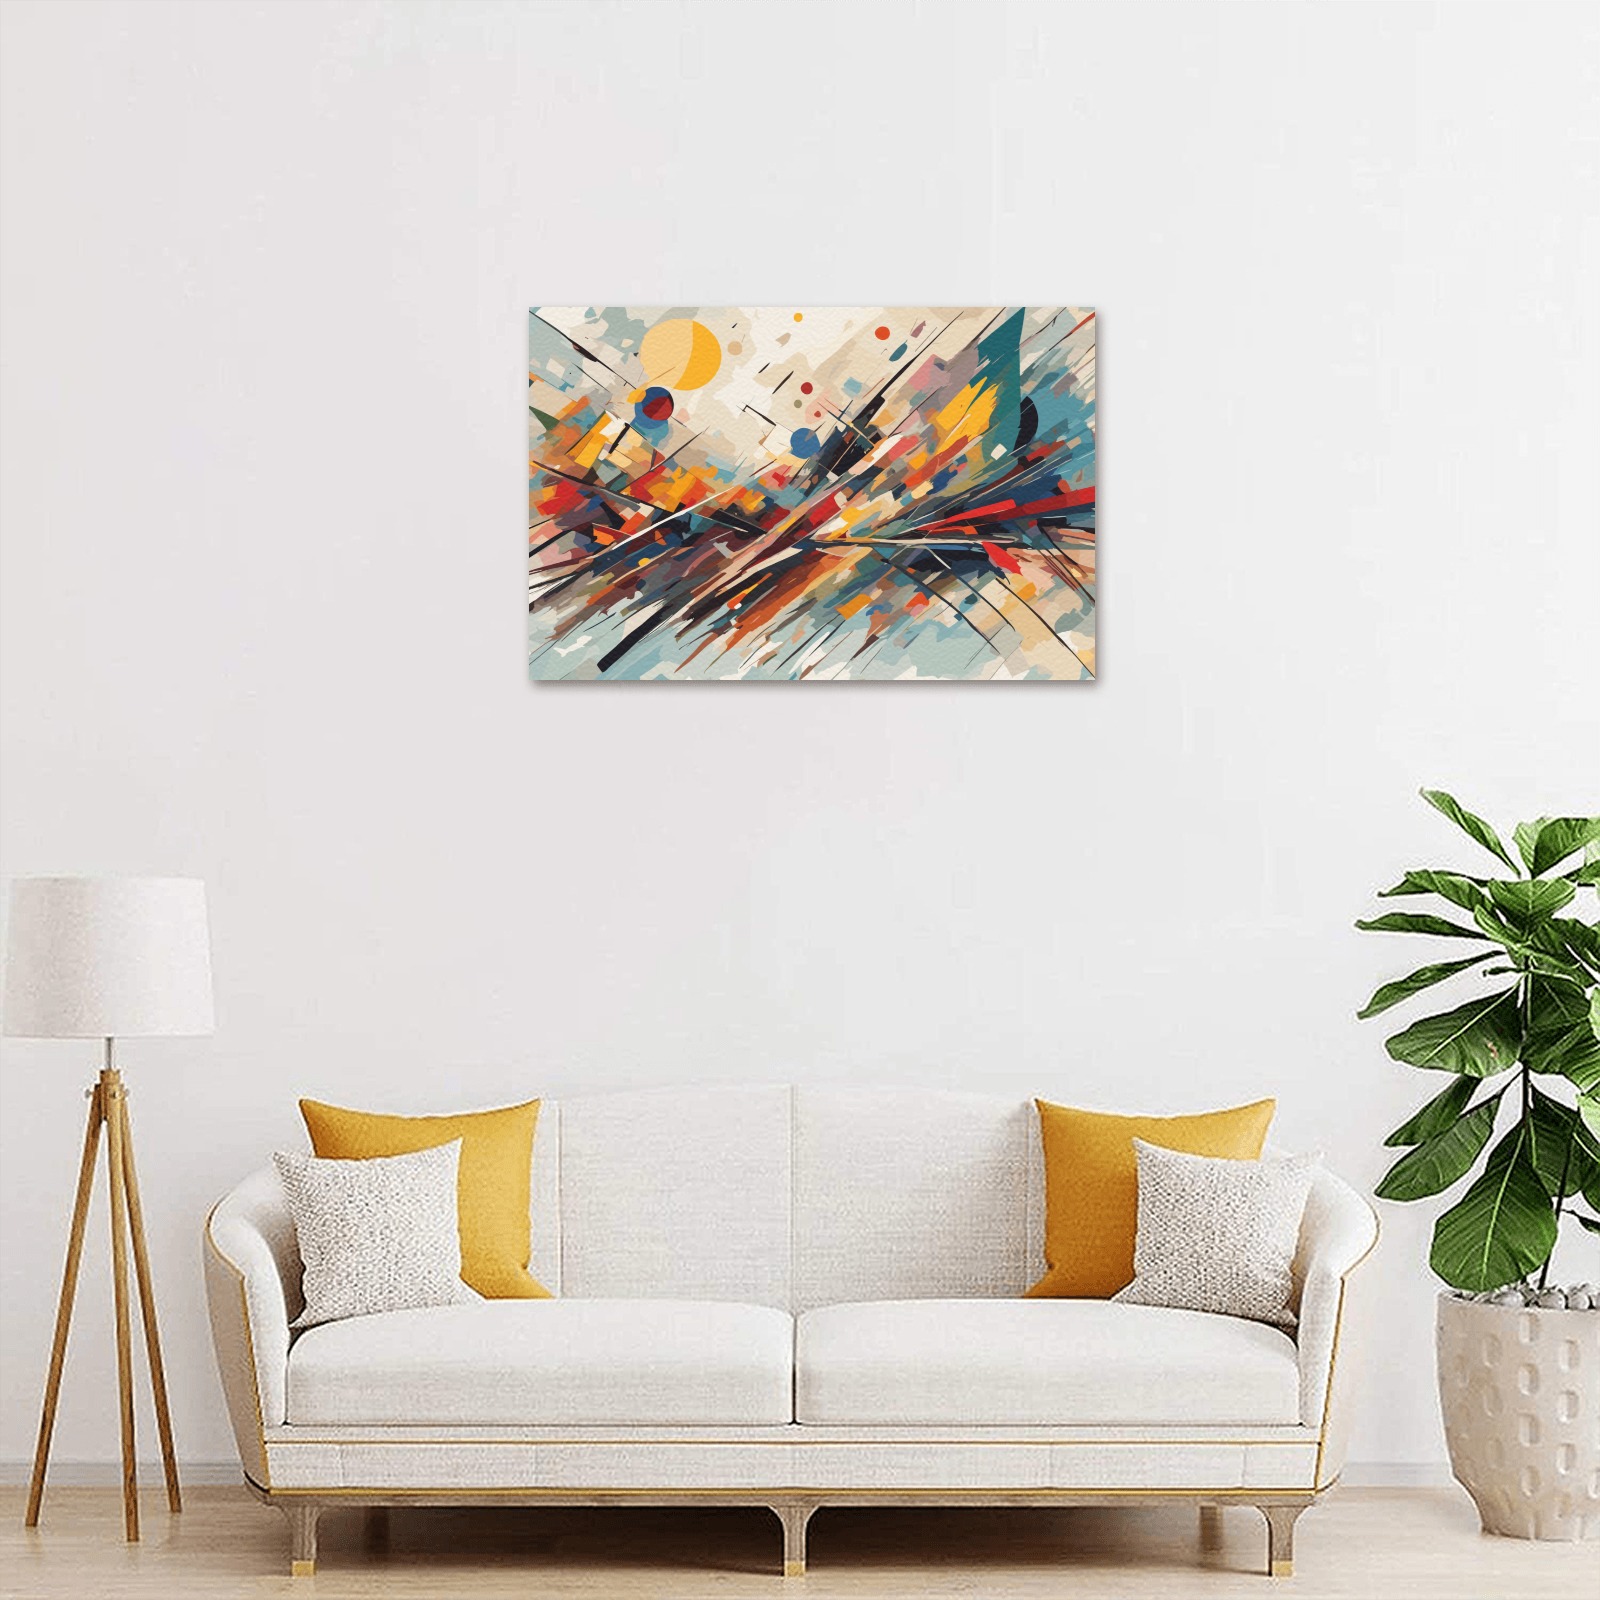 Fantastic abstract art of colorful shapes, lines Upgraded Canvas Print 18"x12"